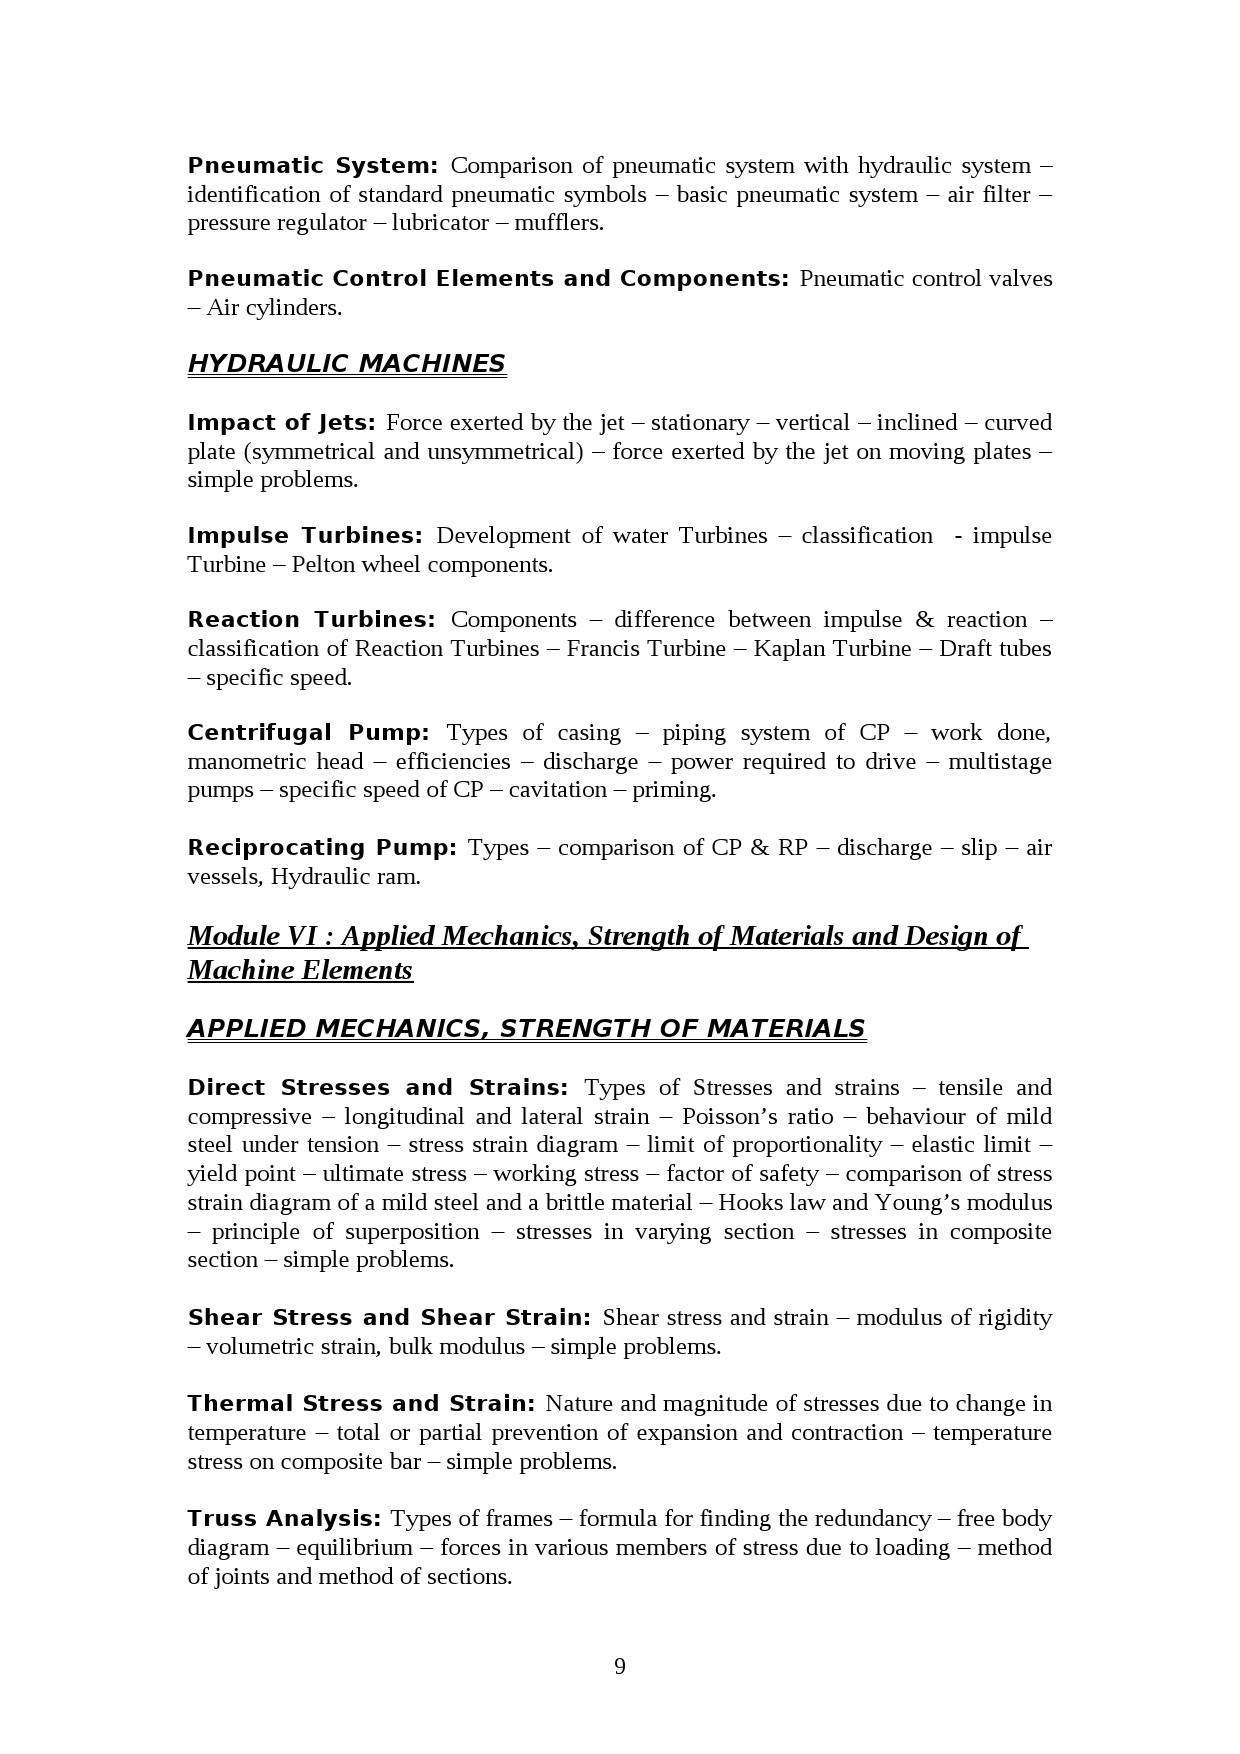 Mechanical Engineering Lecturer in Polytechnic Exam Syllabus - Notification Image 9